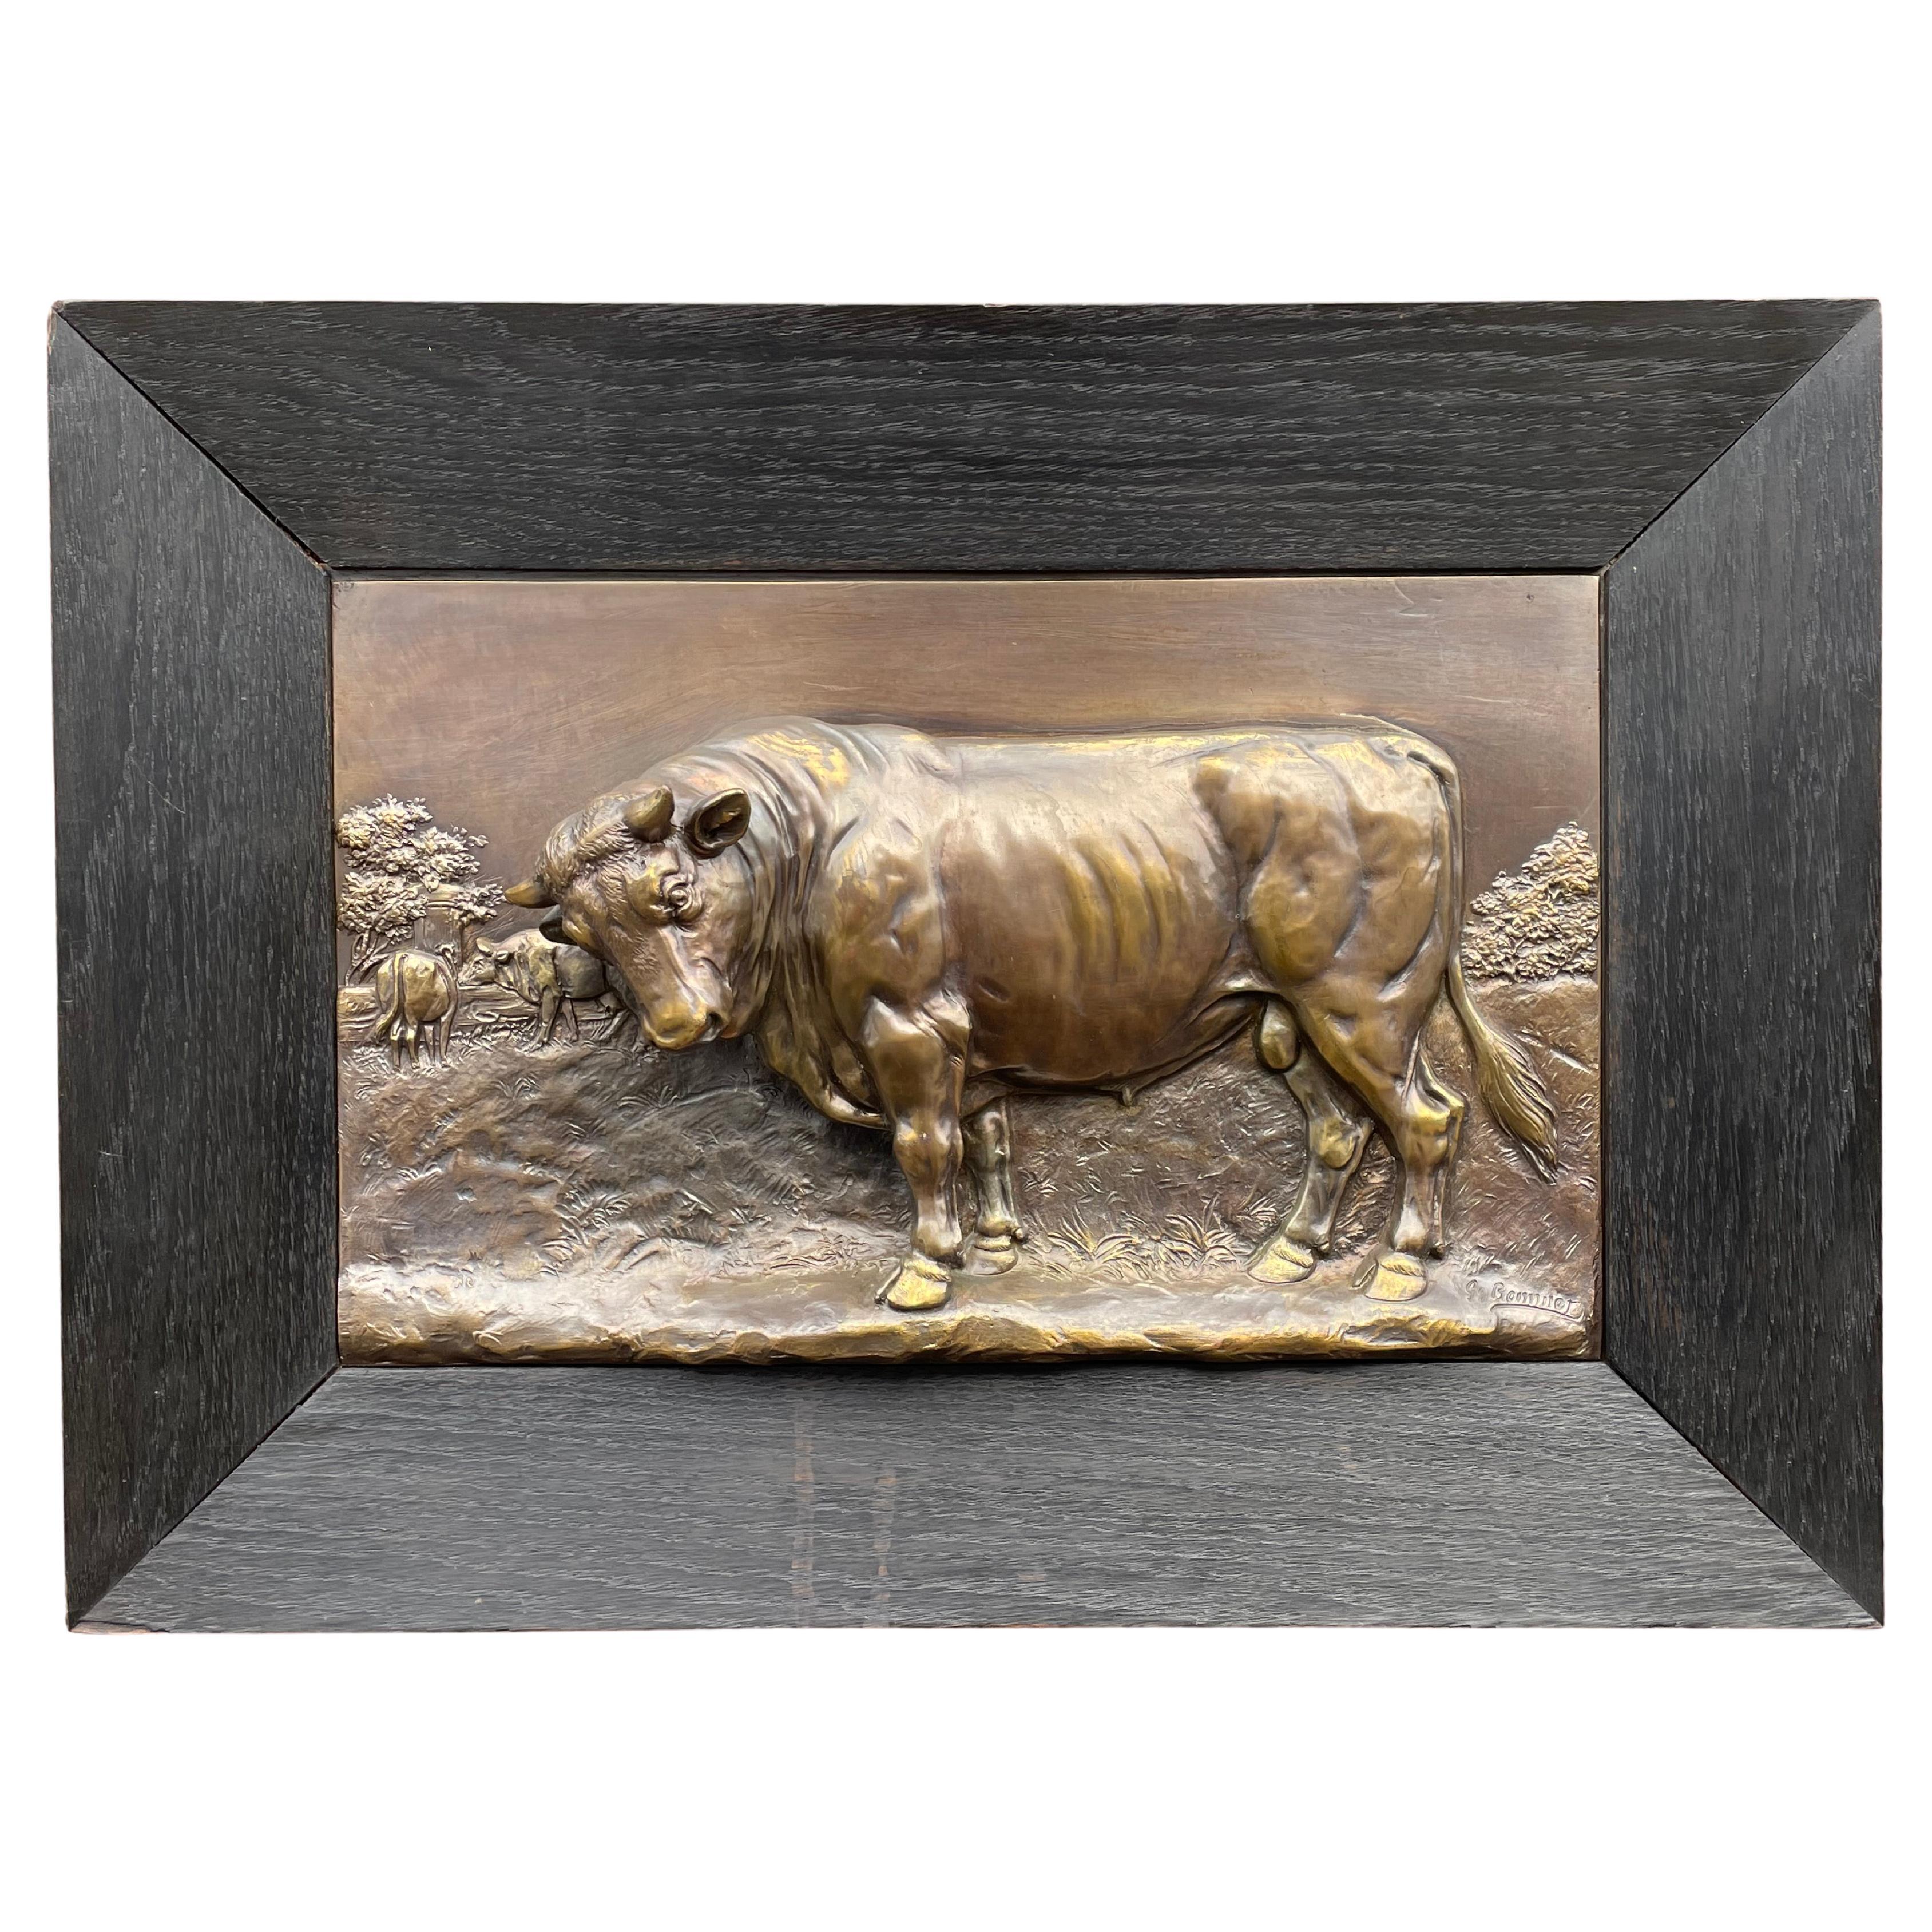 Stunning Bronzed Bull Sculpture Wall Plaque in Blackened Oak Frame, Great Patina